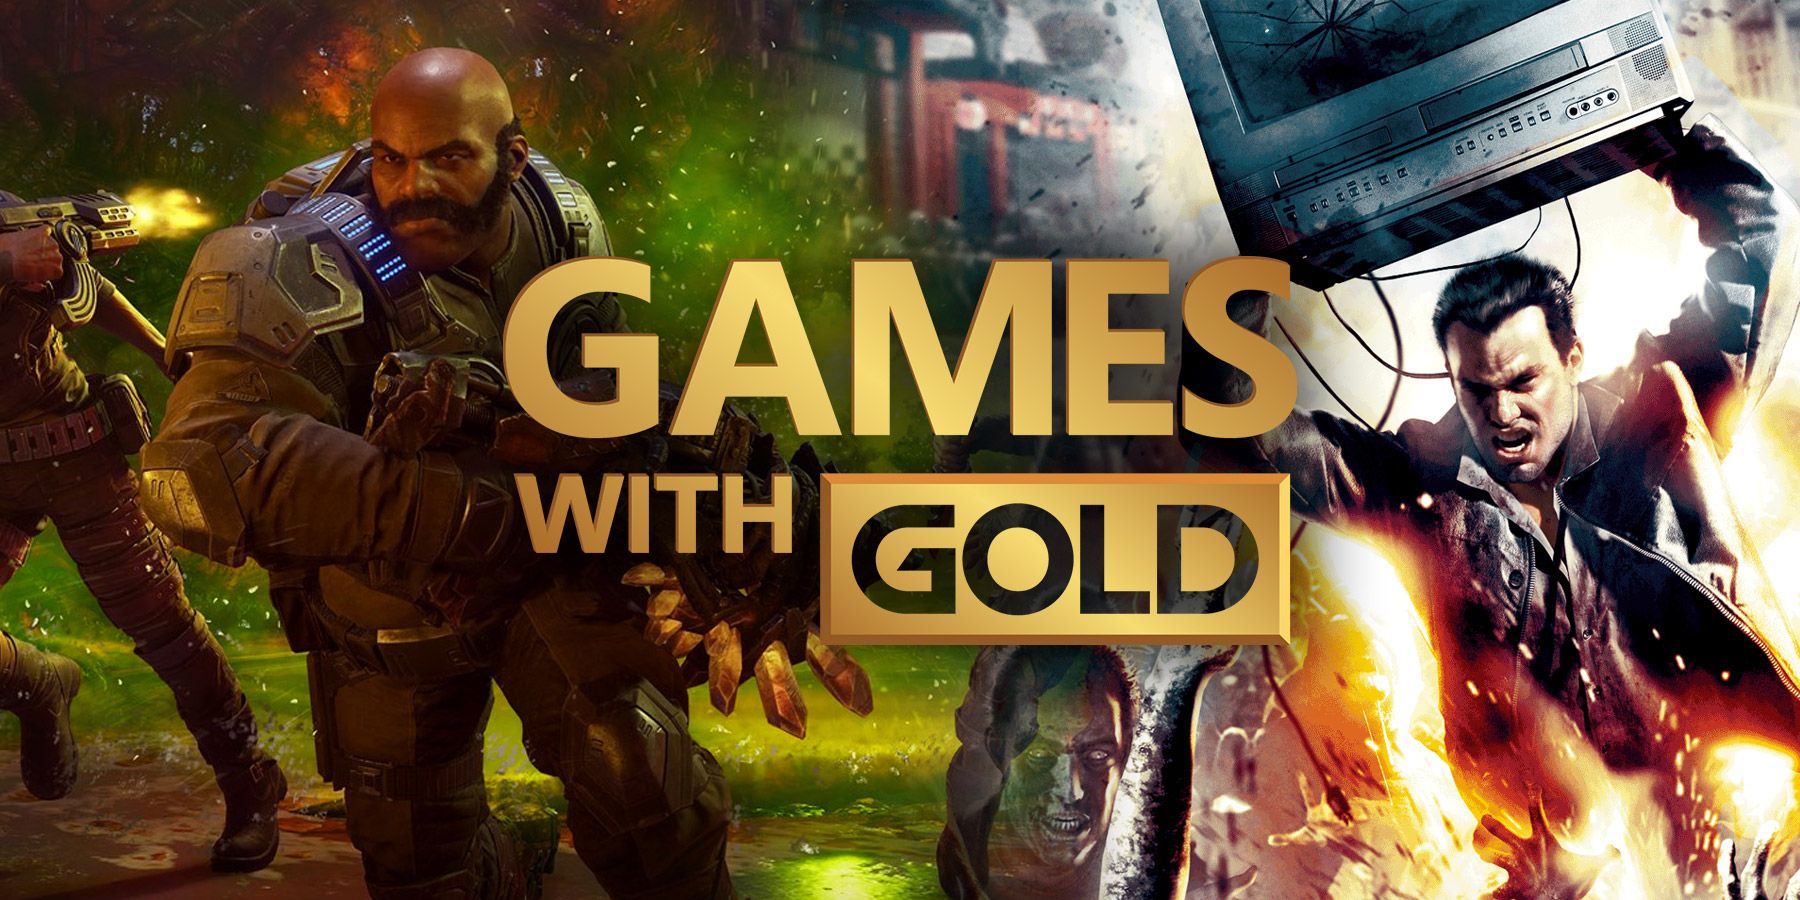 Free Xbox One Games With Gold For February Available Now - GameSpot